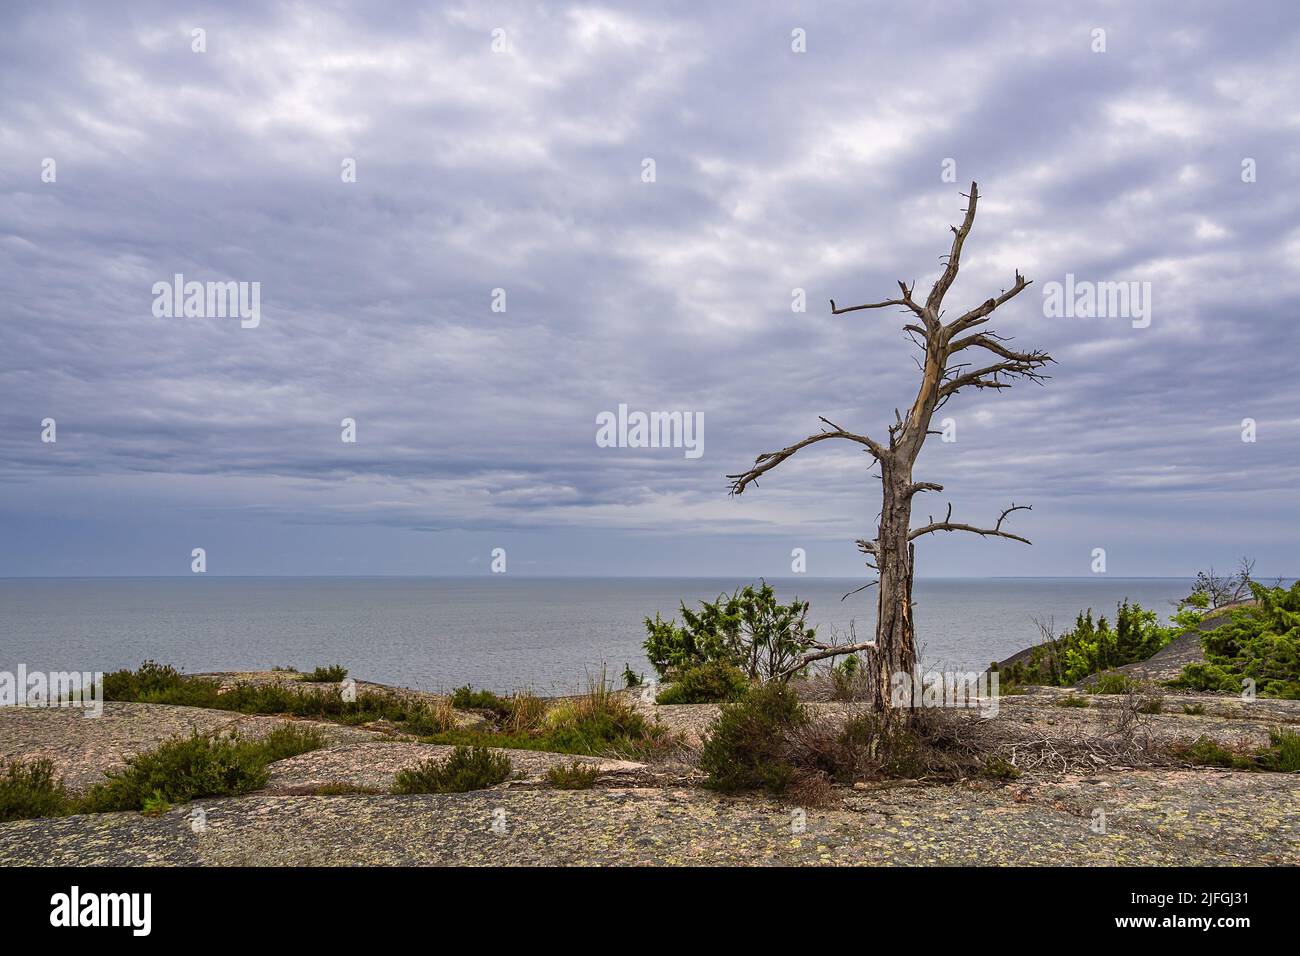 Landscape with rocks and tree on the island Blå Jungfrun in Sweden. Stock Photo